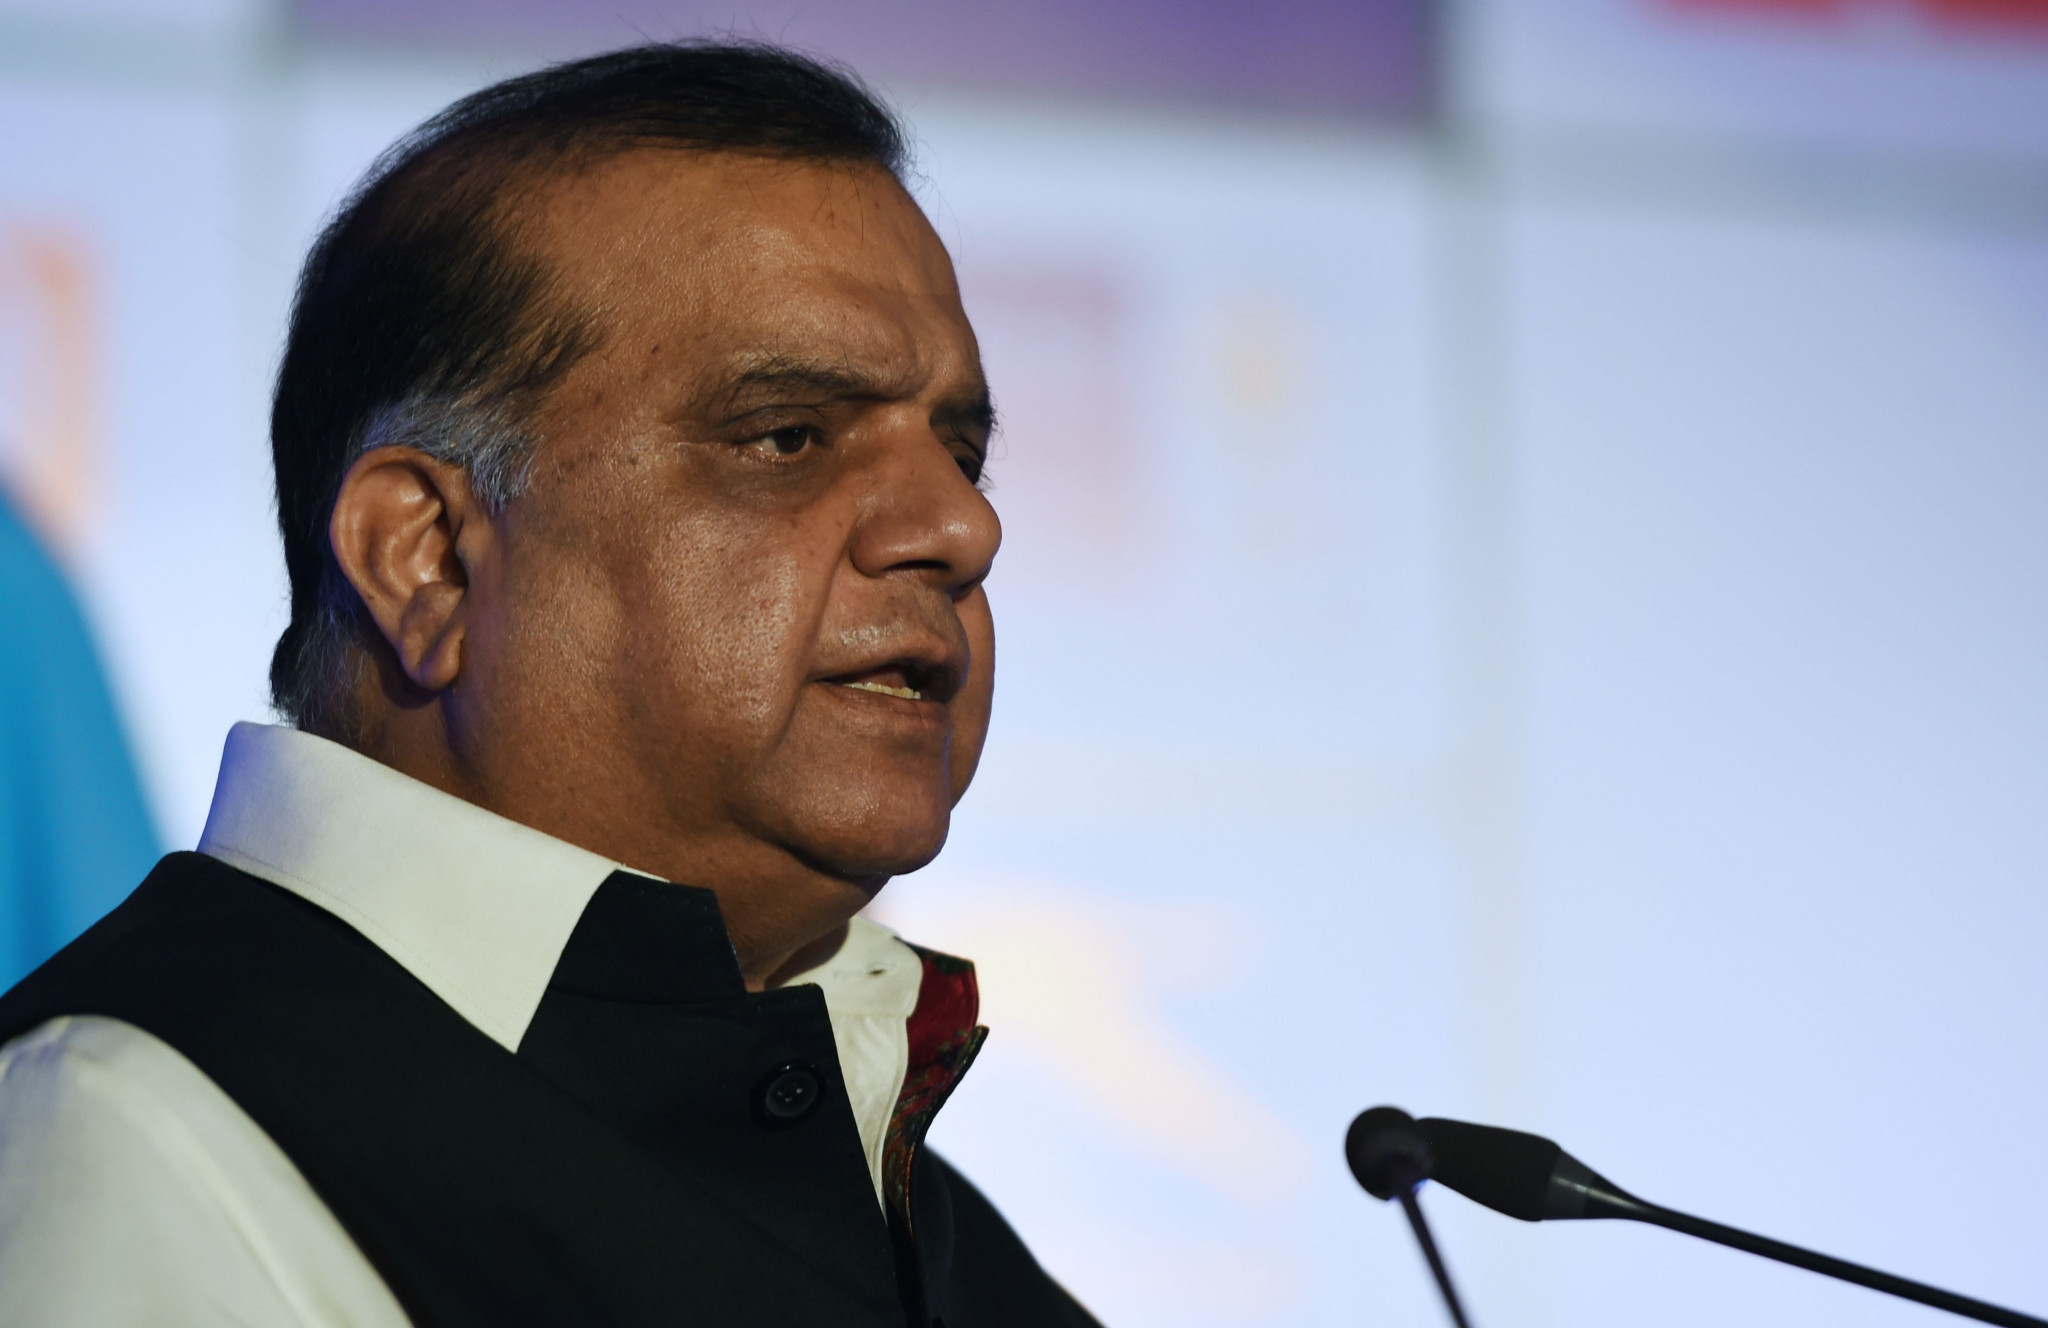 IOA President Narinder Batra has insisted the national governing body will wait for next month’s meeting between the CGF and the ISSF before taking any decision on whether to boycott the 2022 Commonwealth Games in Birmingham ©Getty Images